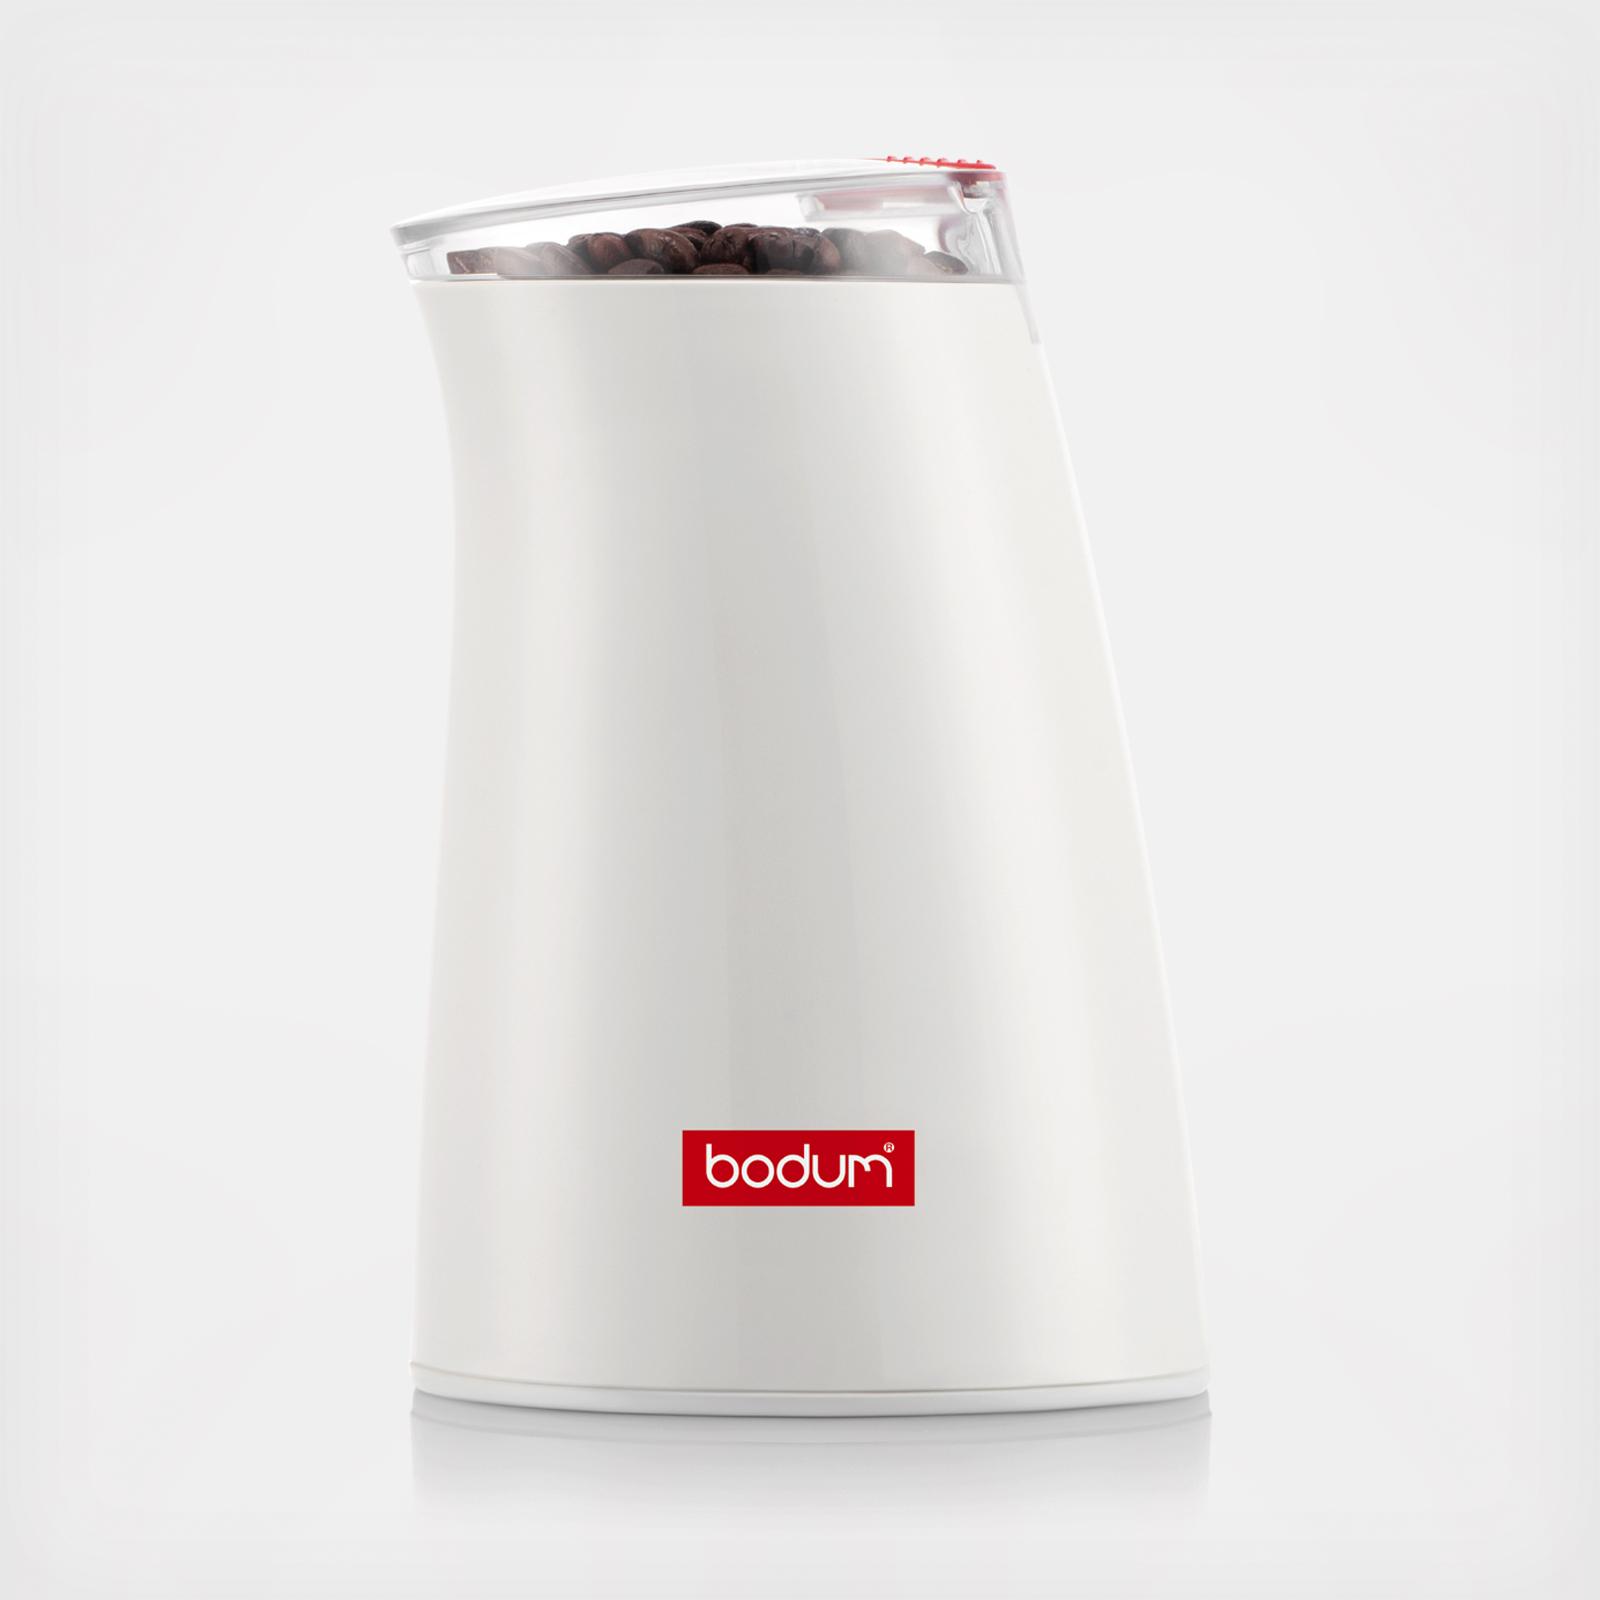 Bodum Bistro Electric Milk Frother - Red Rooster Coffee